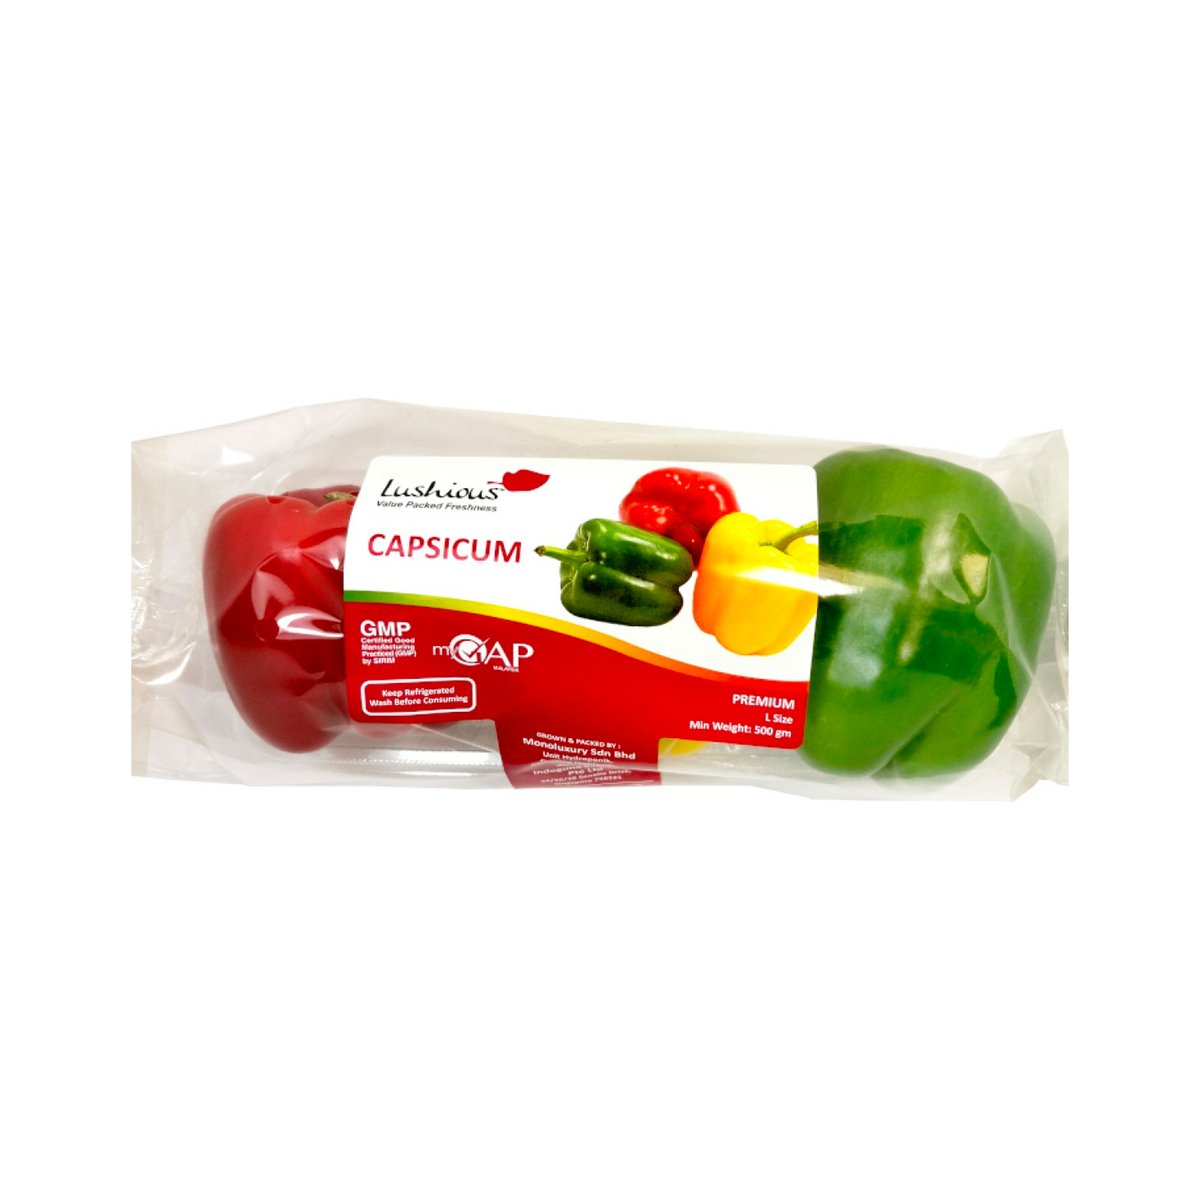 Lushious mixed Capsicum 500g Approx Weight